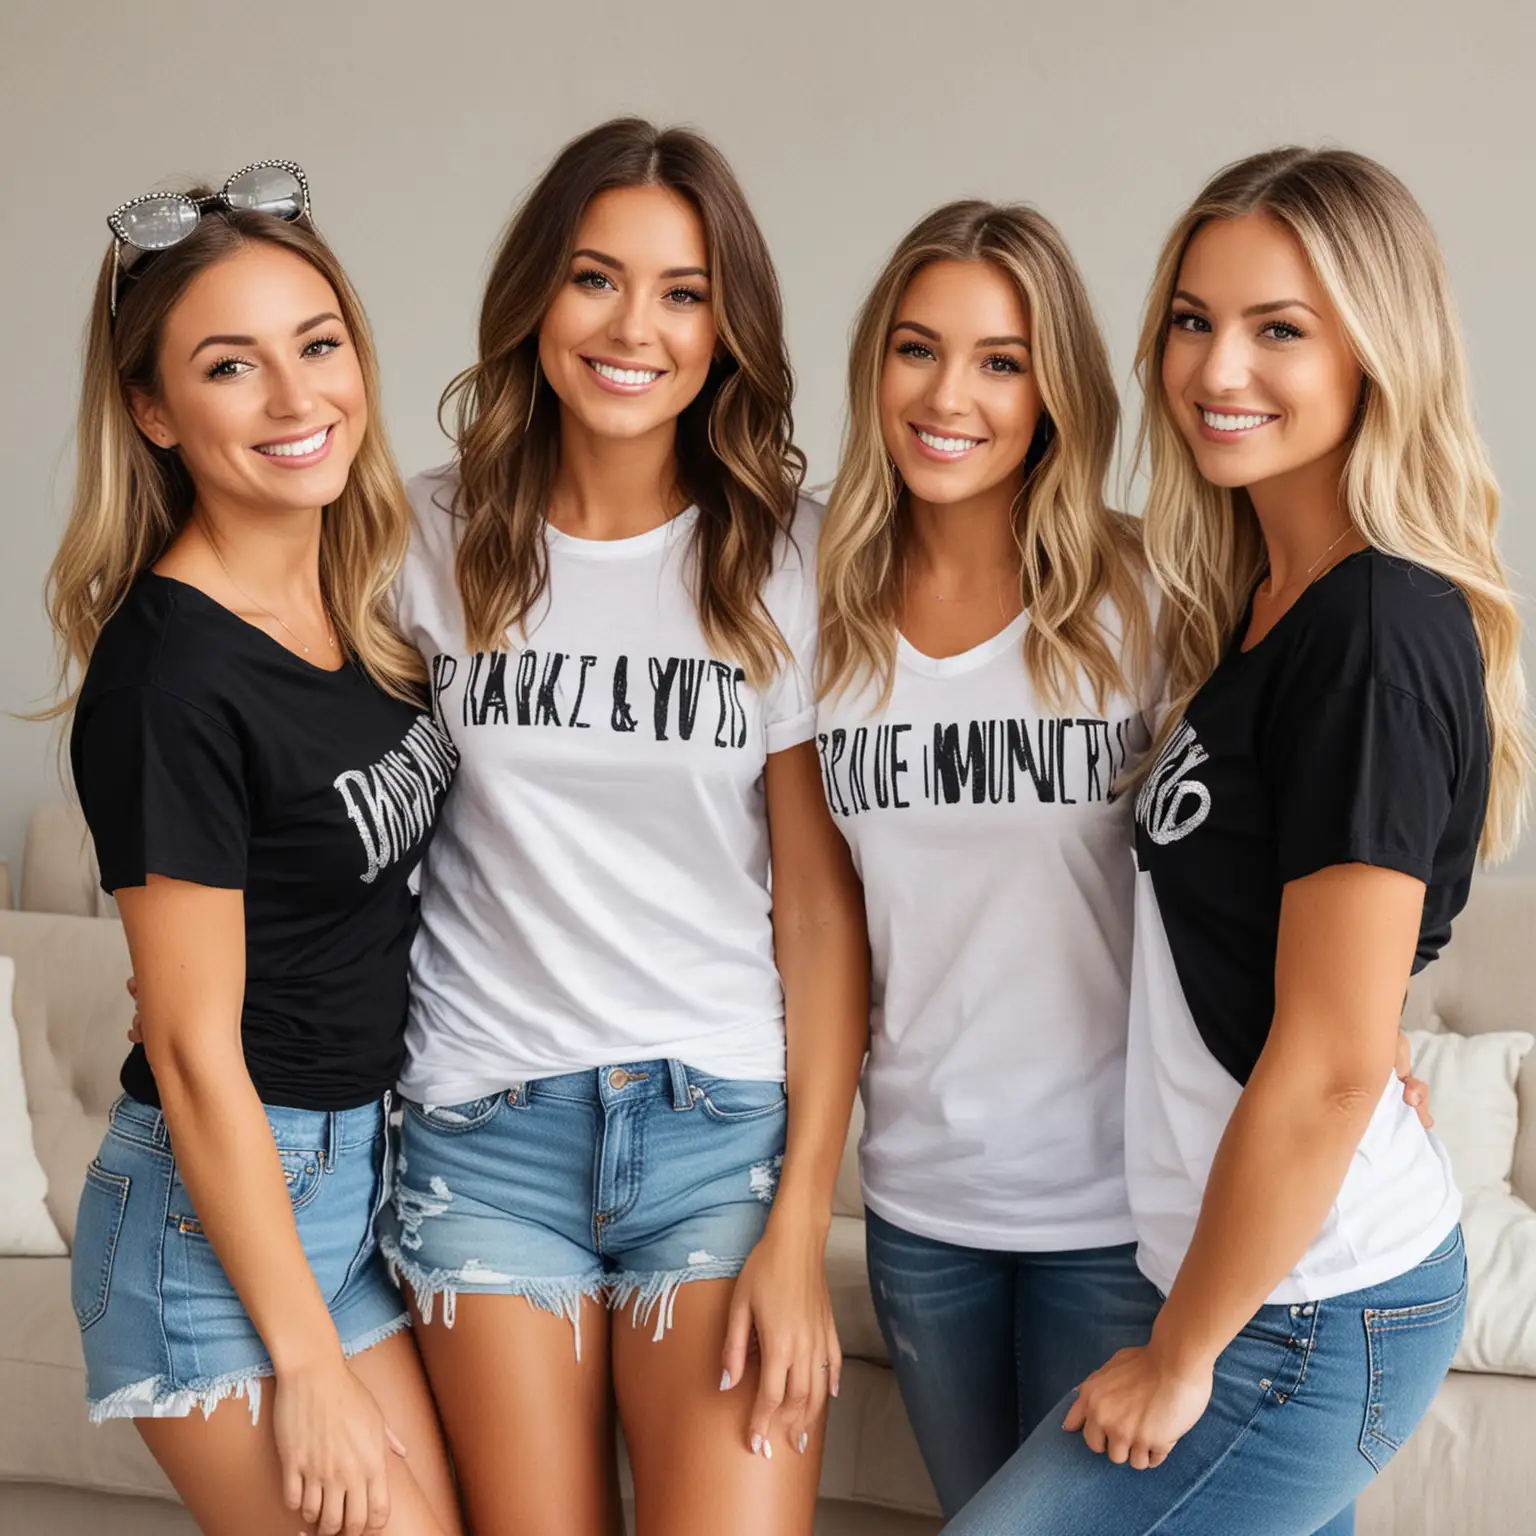 Four Women Celebrating at Bachelorette Party with Stylish Black and White Tees